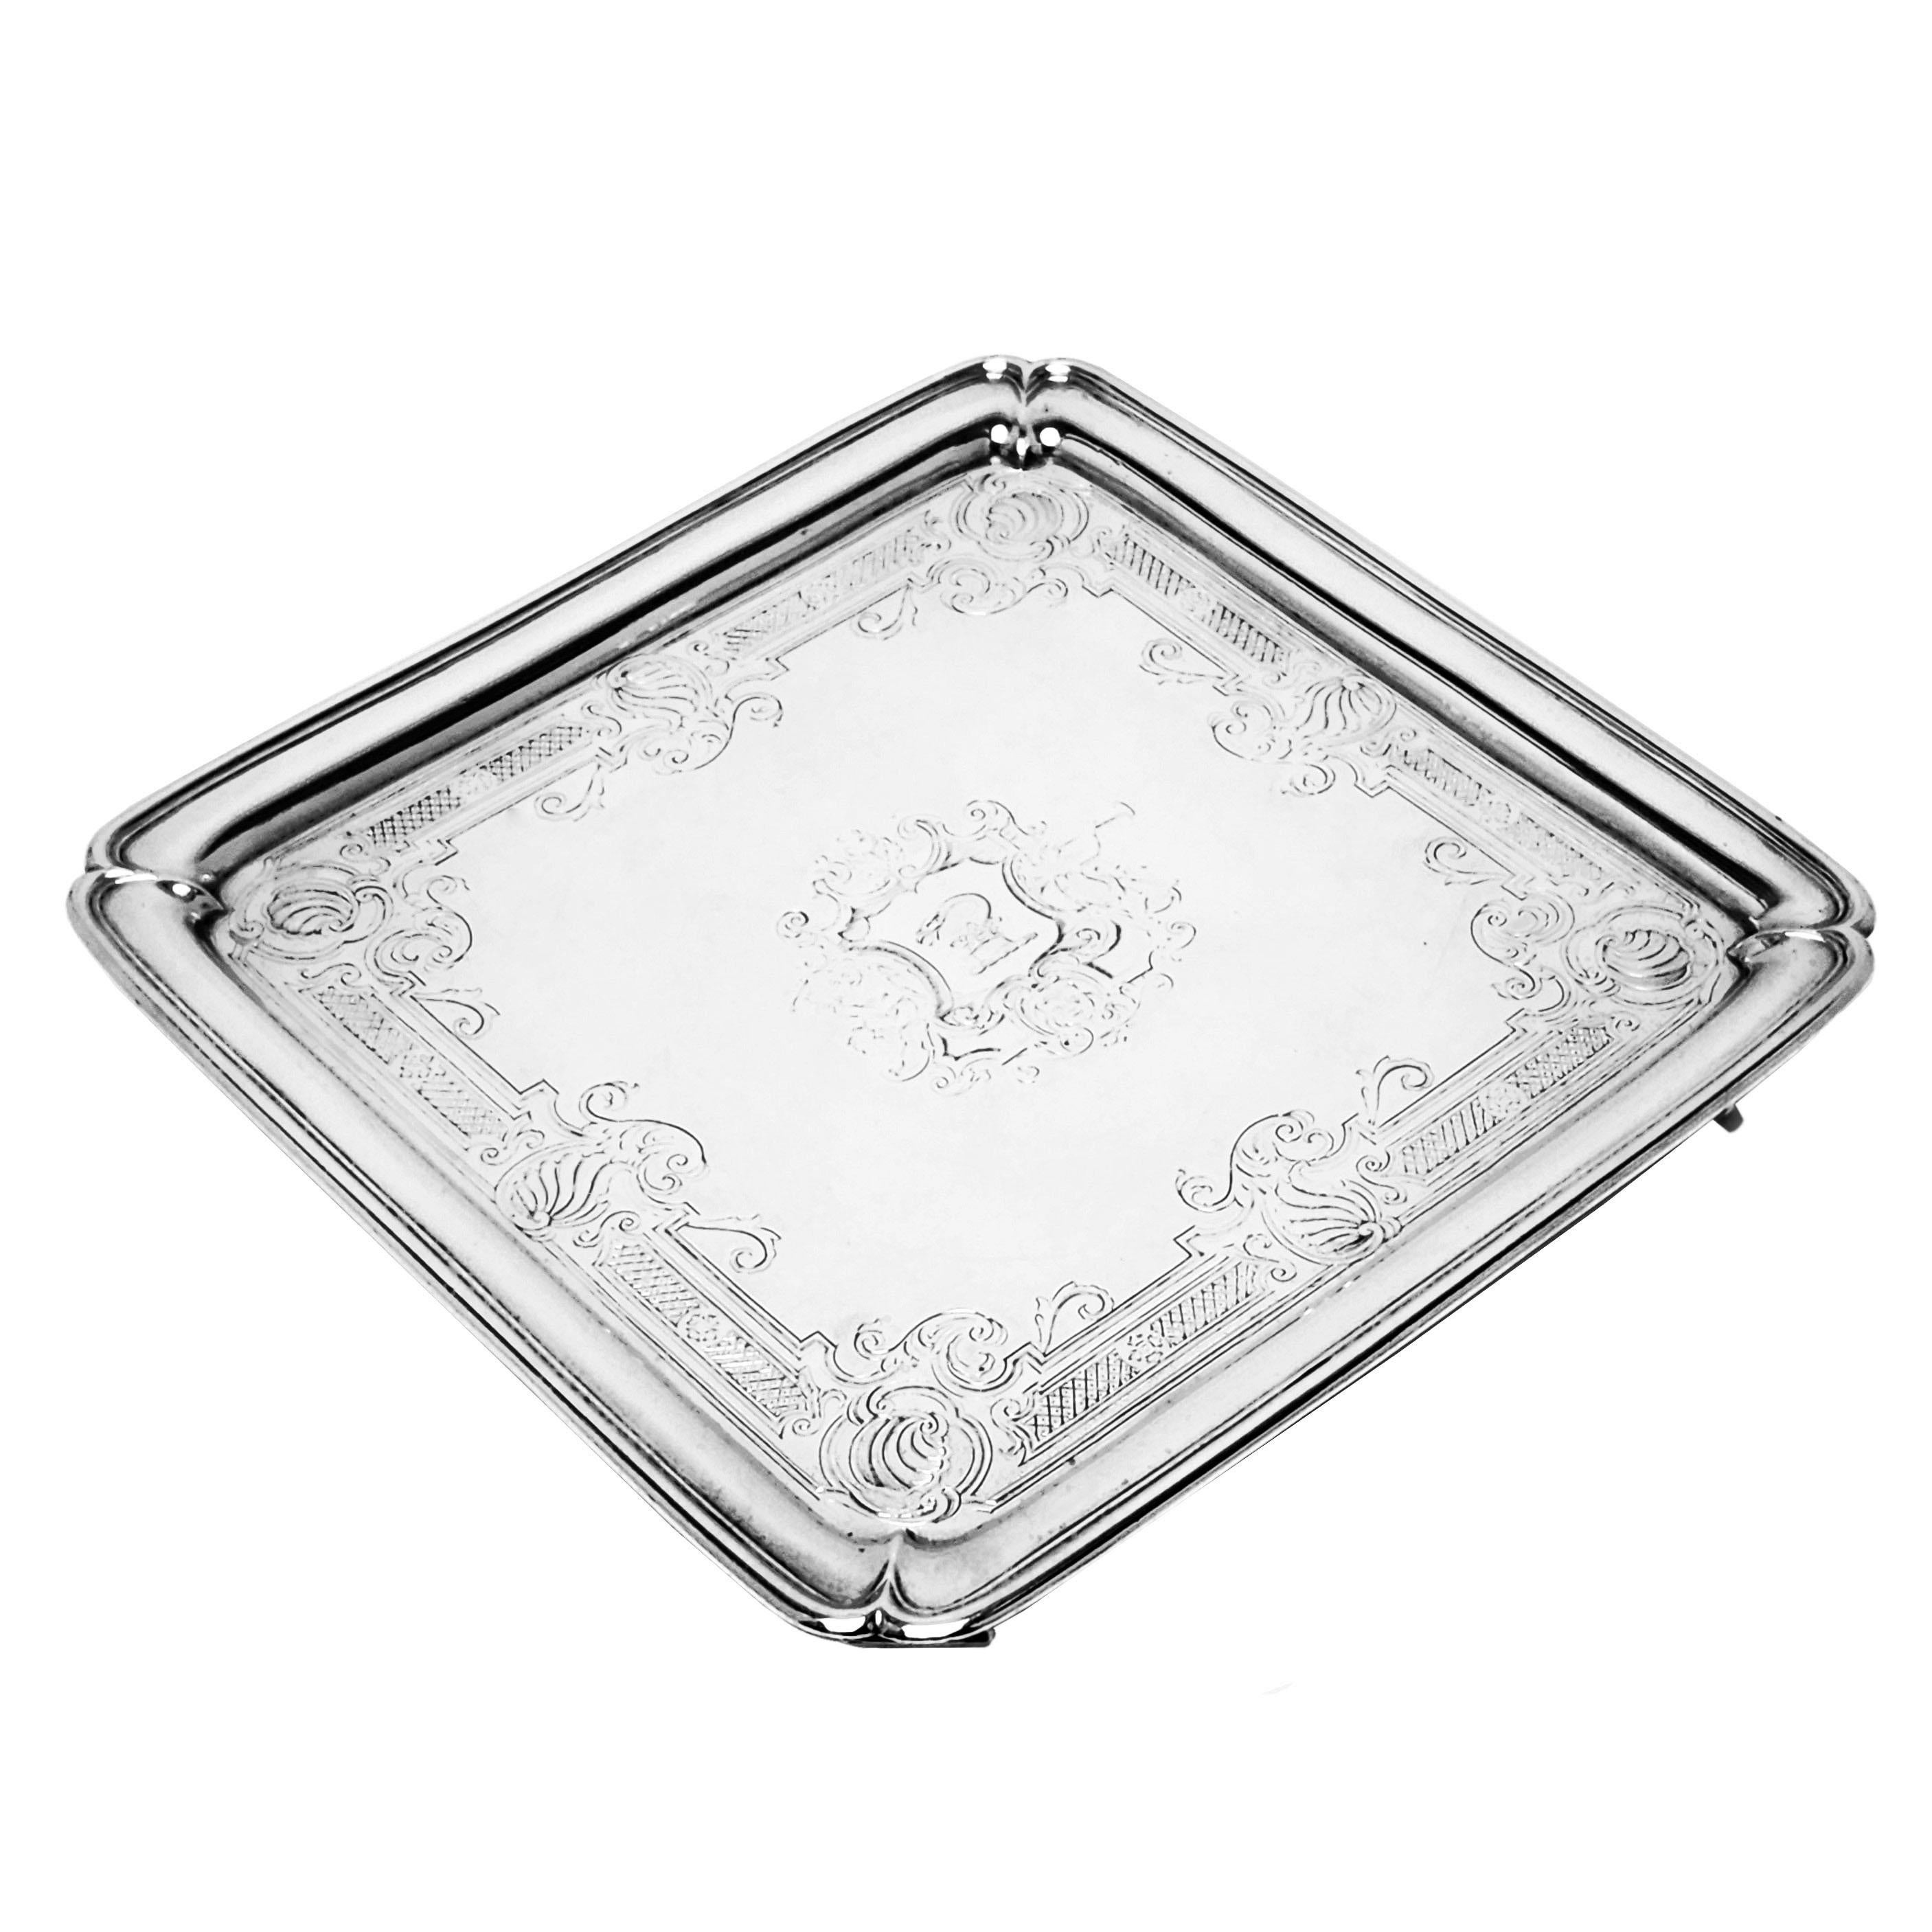 A lovely Antique George II Solid Silver Salver. This Square early Georgian Salver stands on 4 shaped feet and is embellished with an elegant engraved border surrounding an armorial.

Made in London, England in 1733 by Ayme Videau.

Approx. Weight -